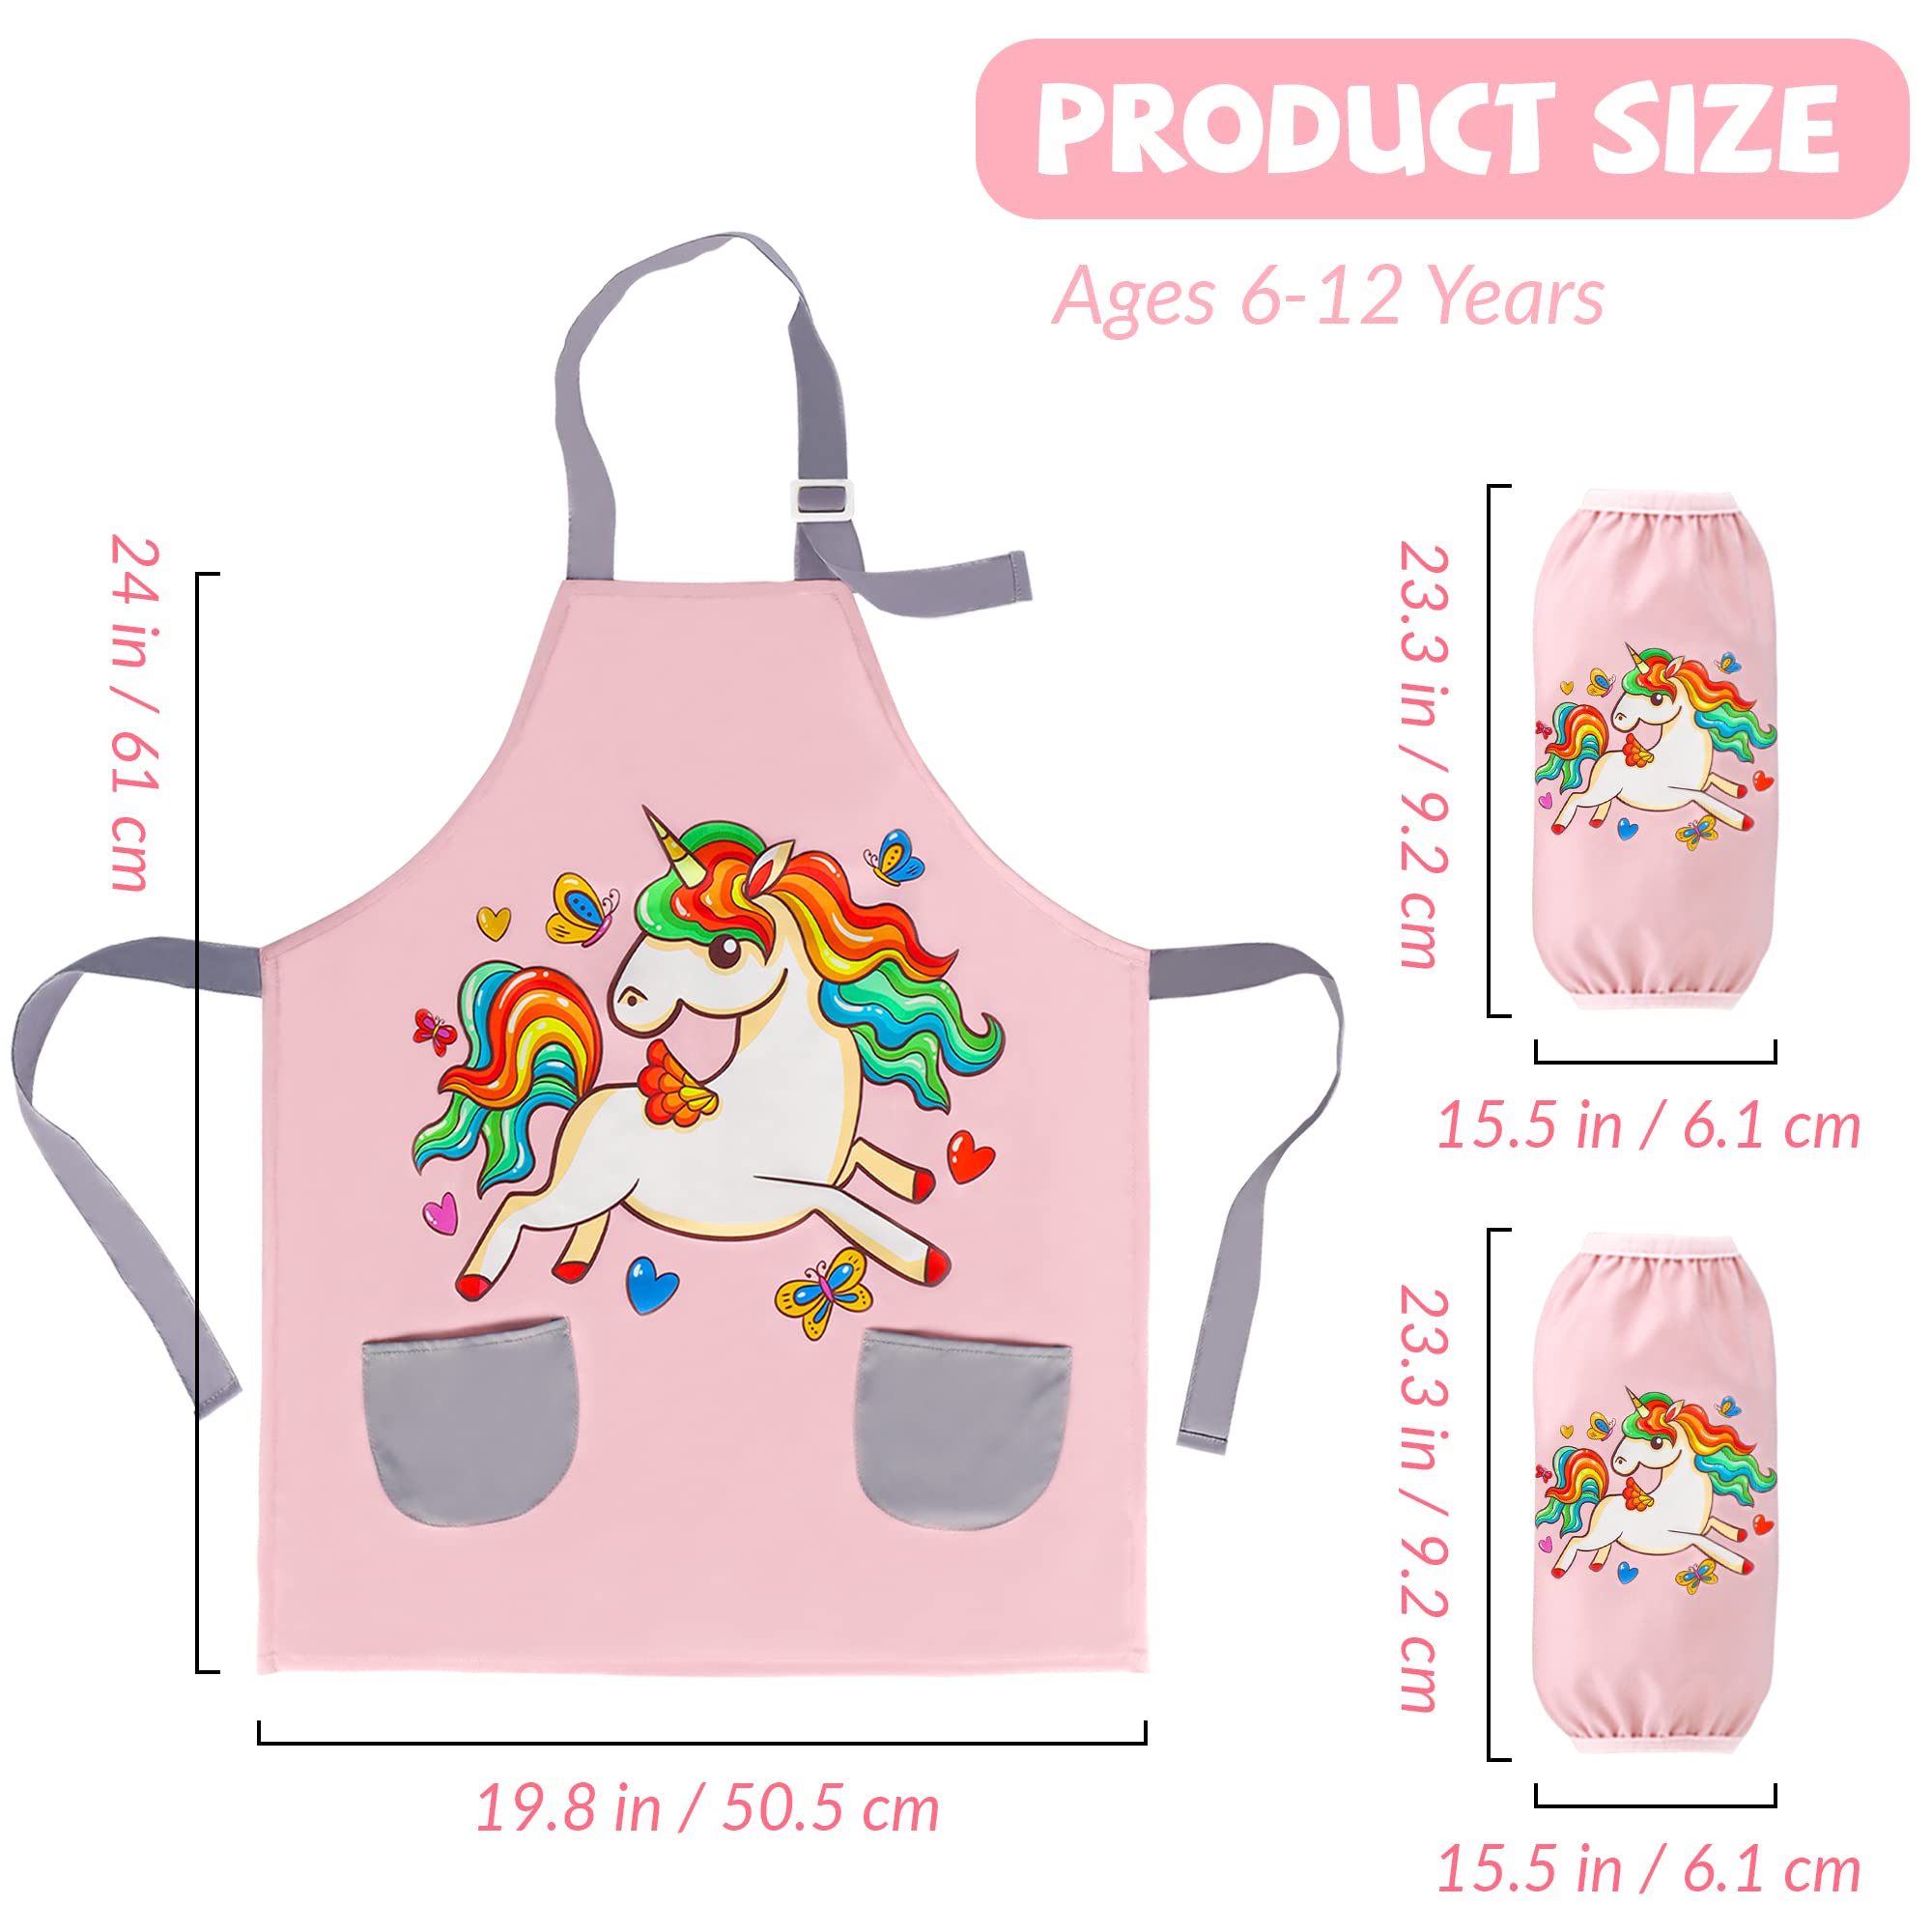 FUSOTO Unicorn Kids Aprons for Girls, Kids Cute Kitchen Cooking Apron for Ages 6-12, Kids Artist Painting Apron with Pockets, Arts and Crafts for Kids, Unicorns Gifts for Girls